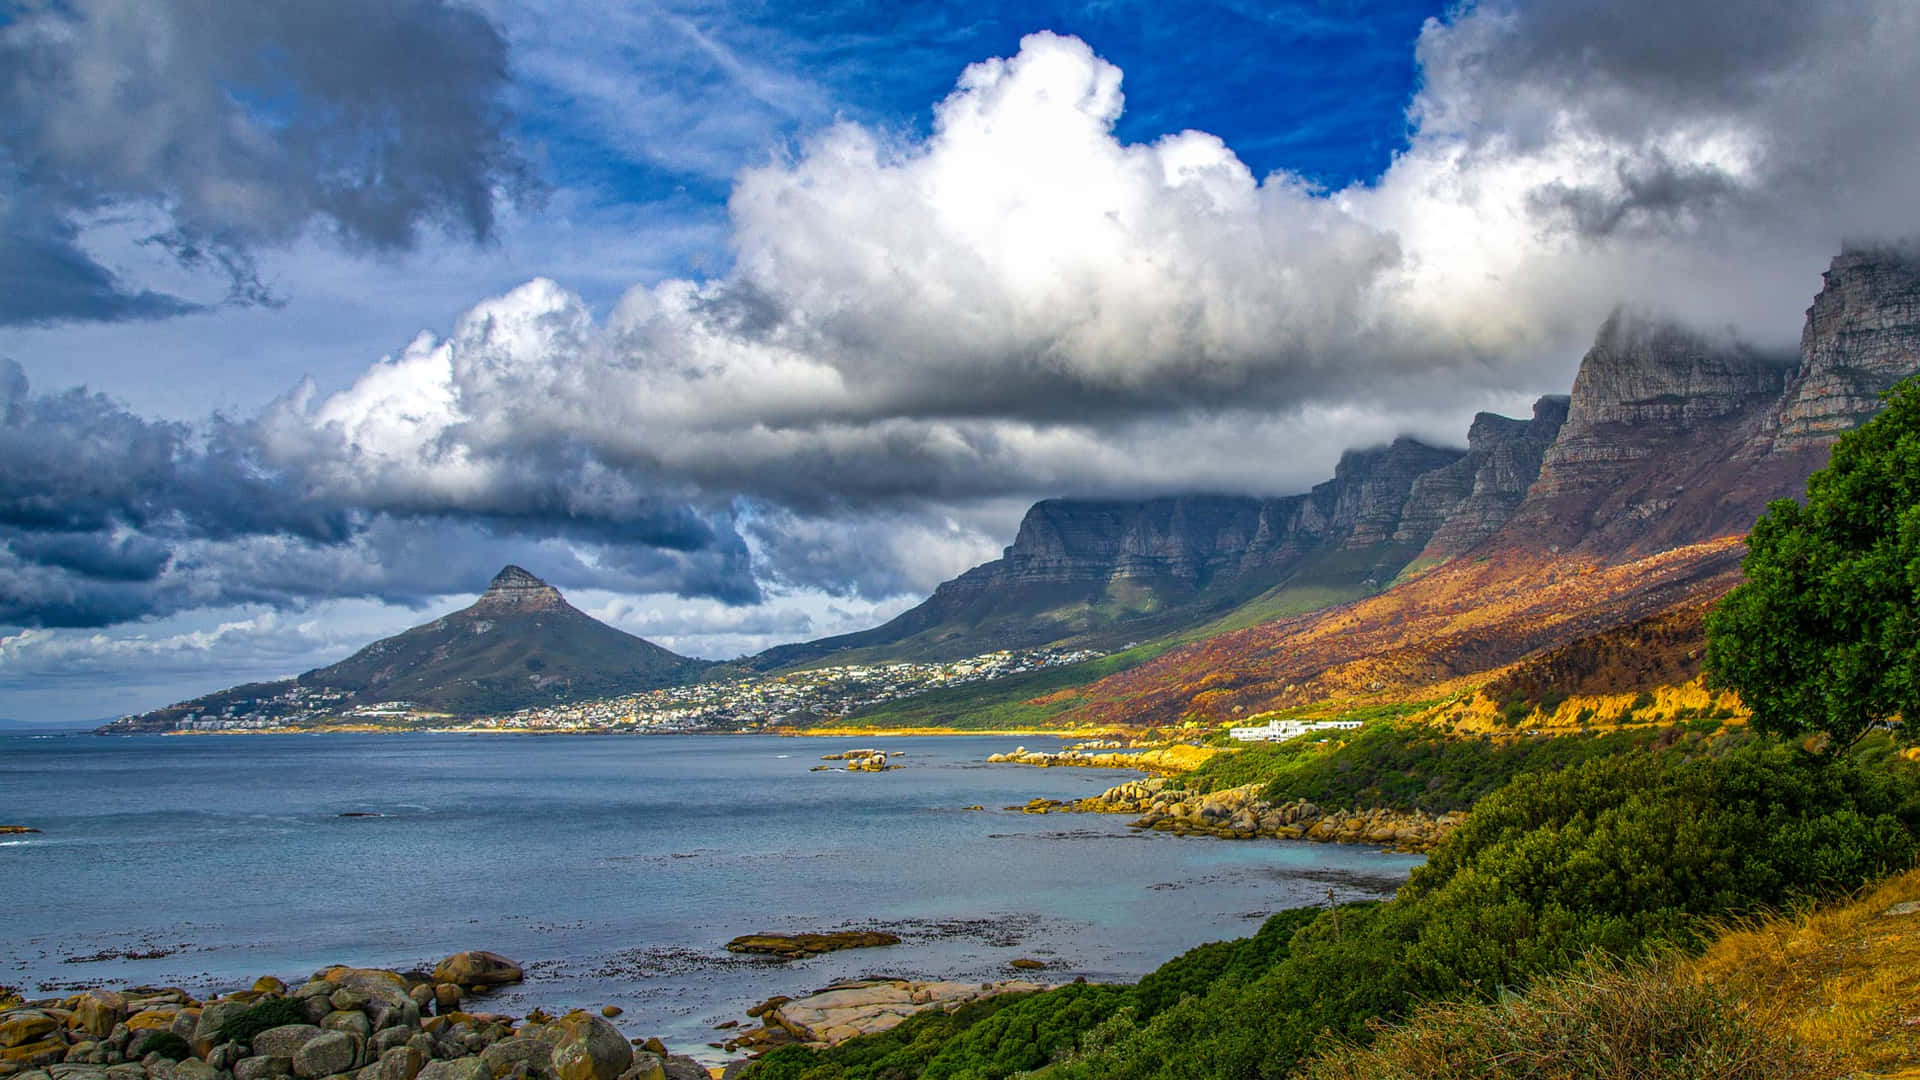 Captivating Landscape of Table Mountain, South Africa